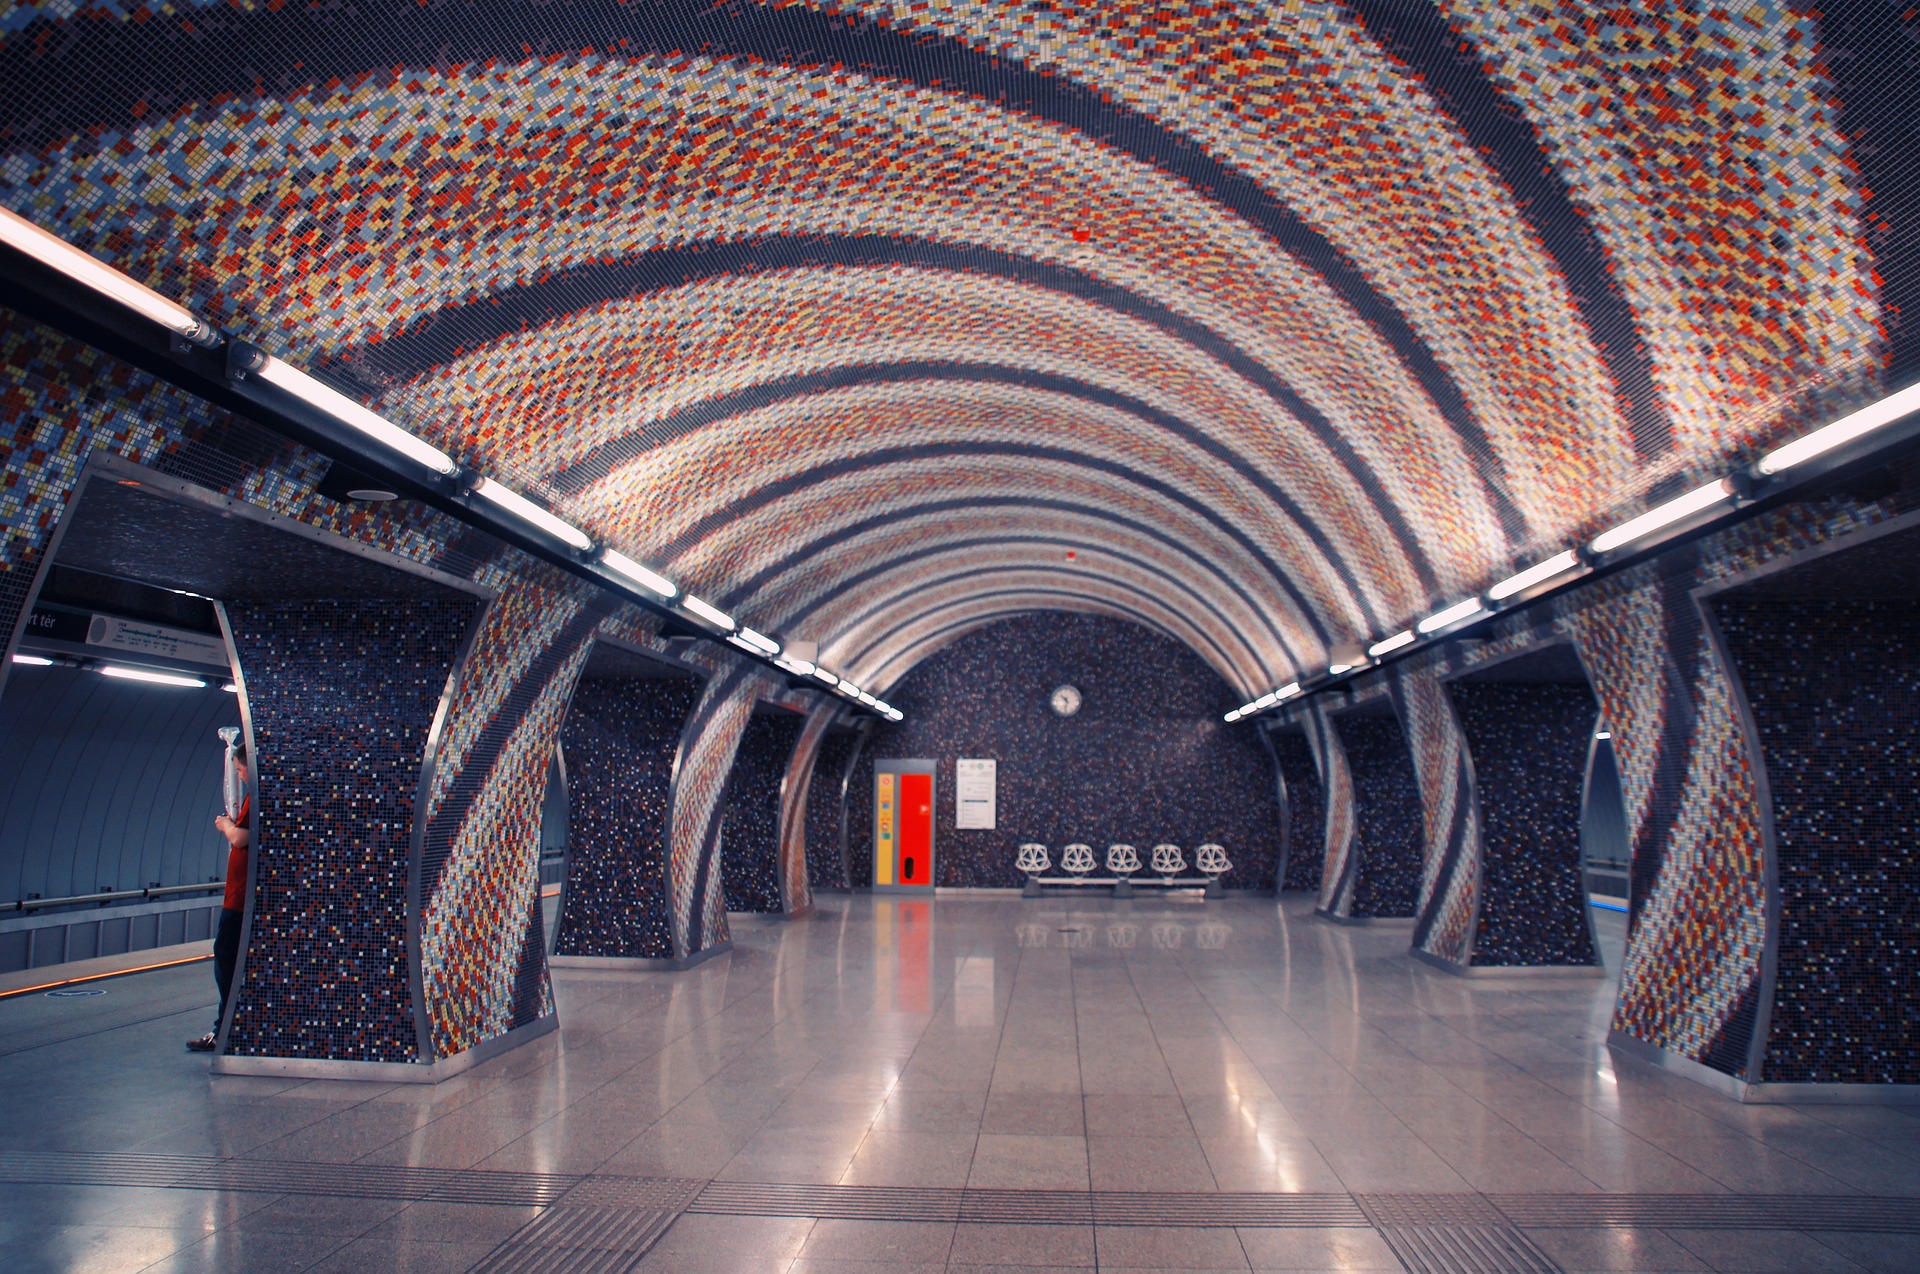 The Szent Gellért Tér metro station in Budapest, Hungary with its colourful mosaic design.